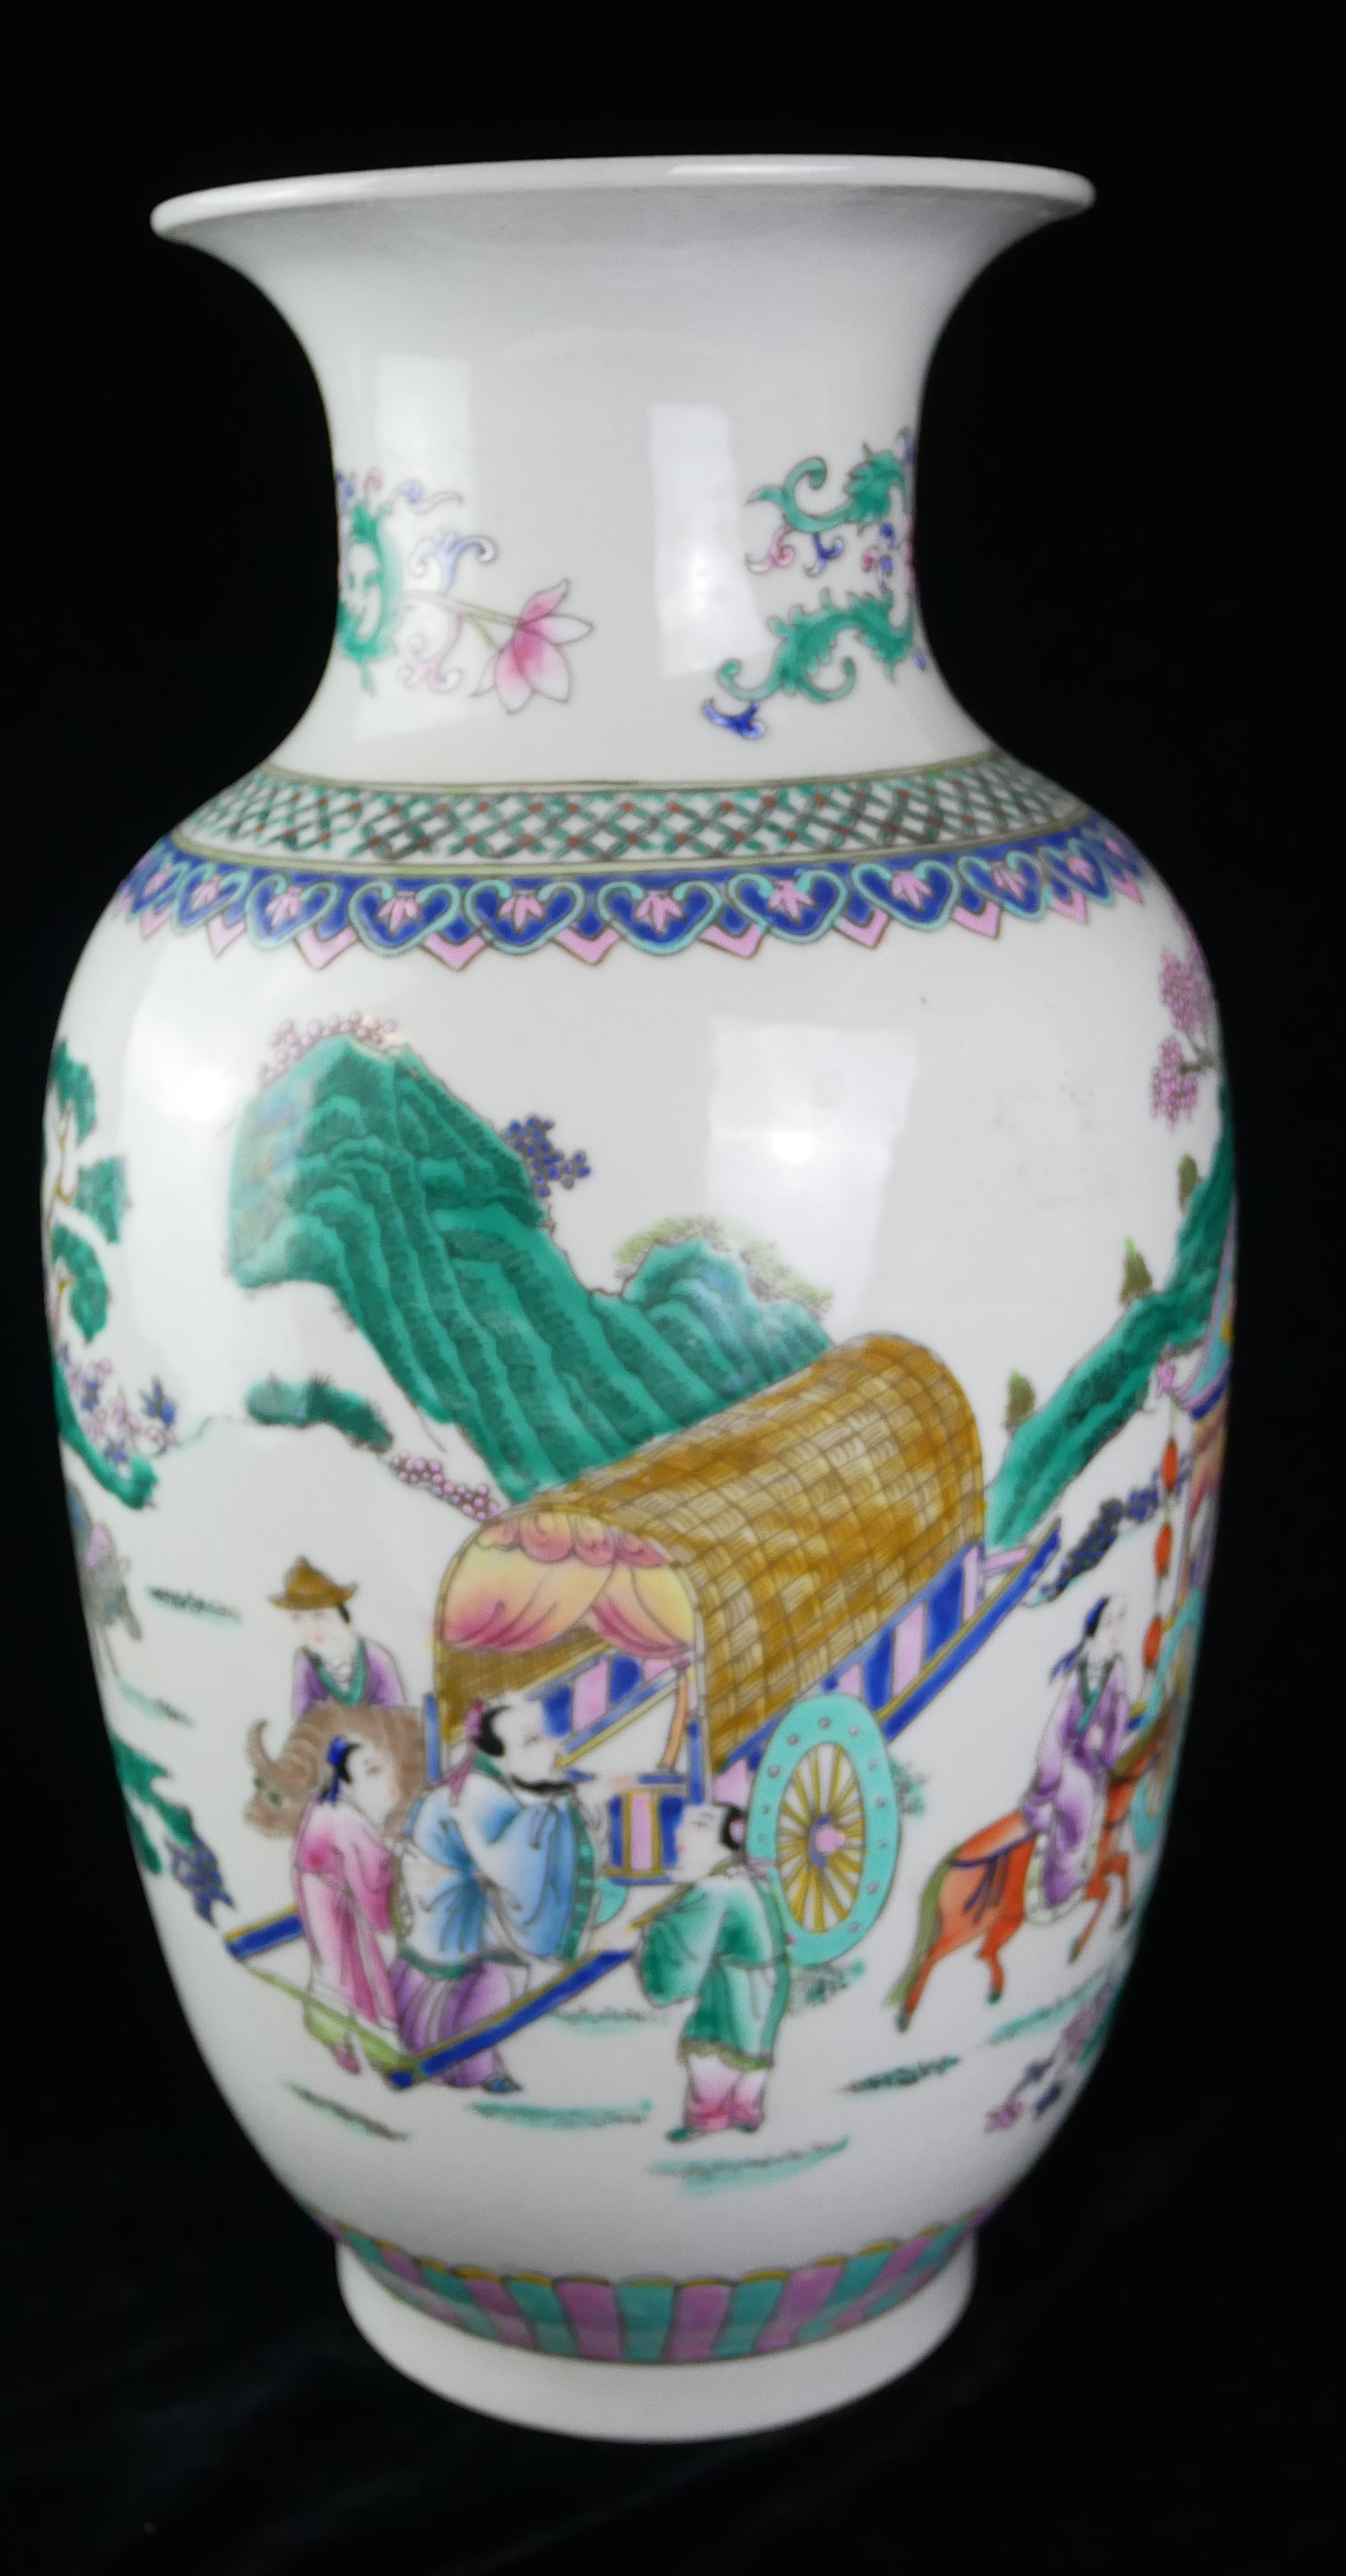 A CHINESE FAMILLE ROSE DESIGN PORCELAIN VASE Decorated with an Emperor with Royal carriage and